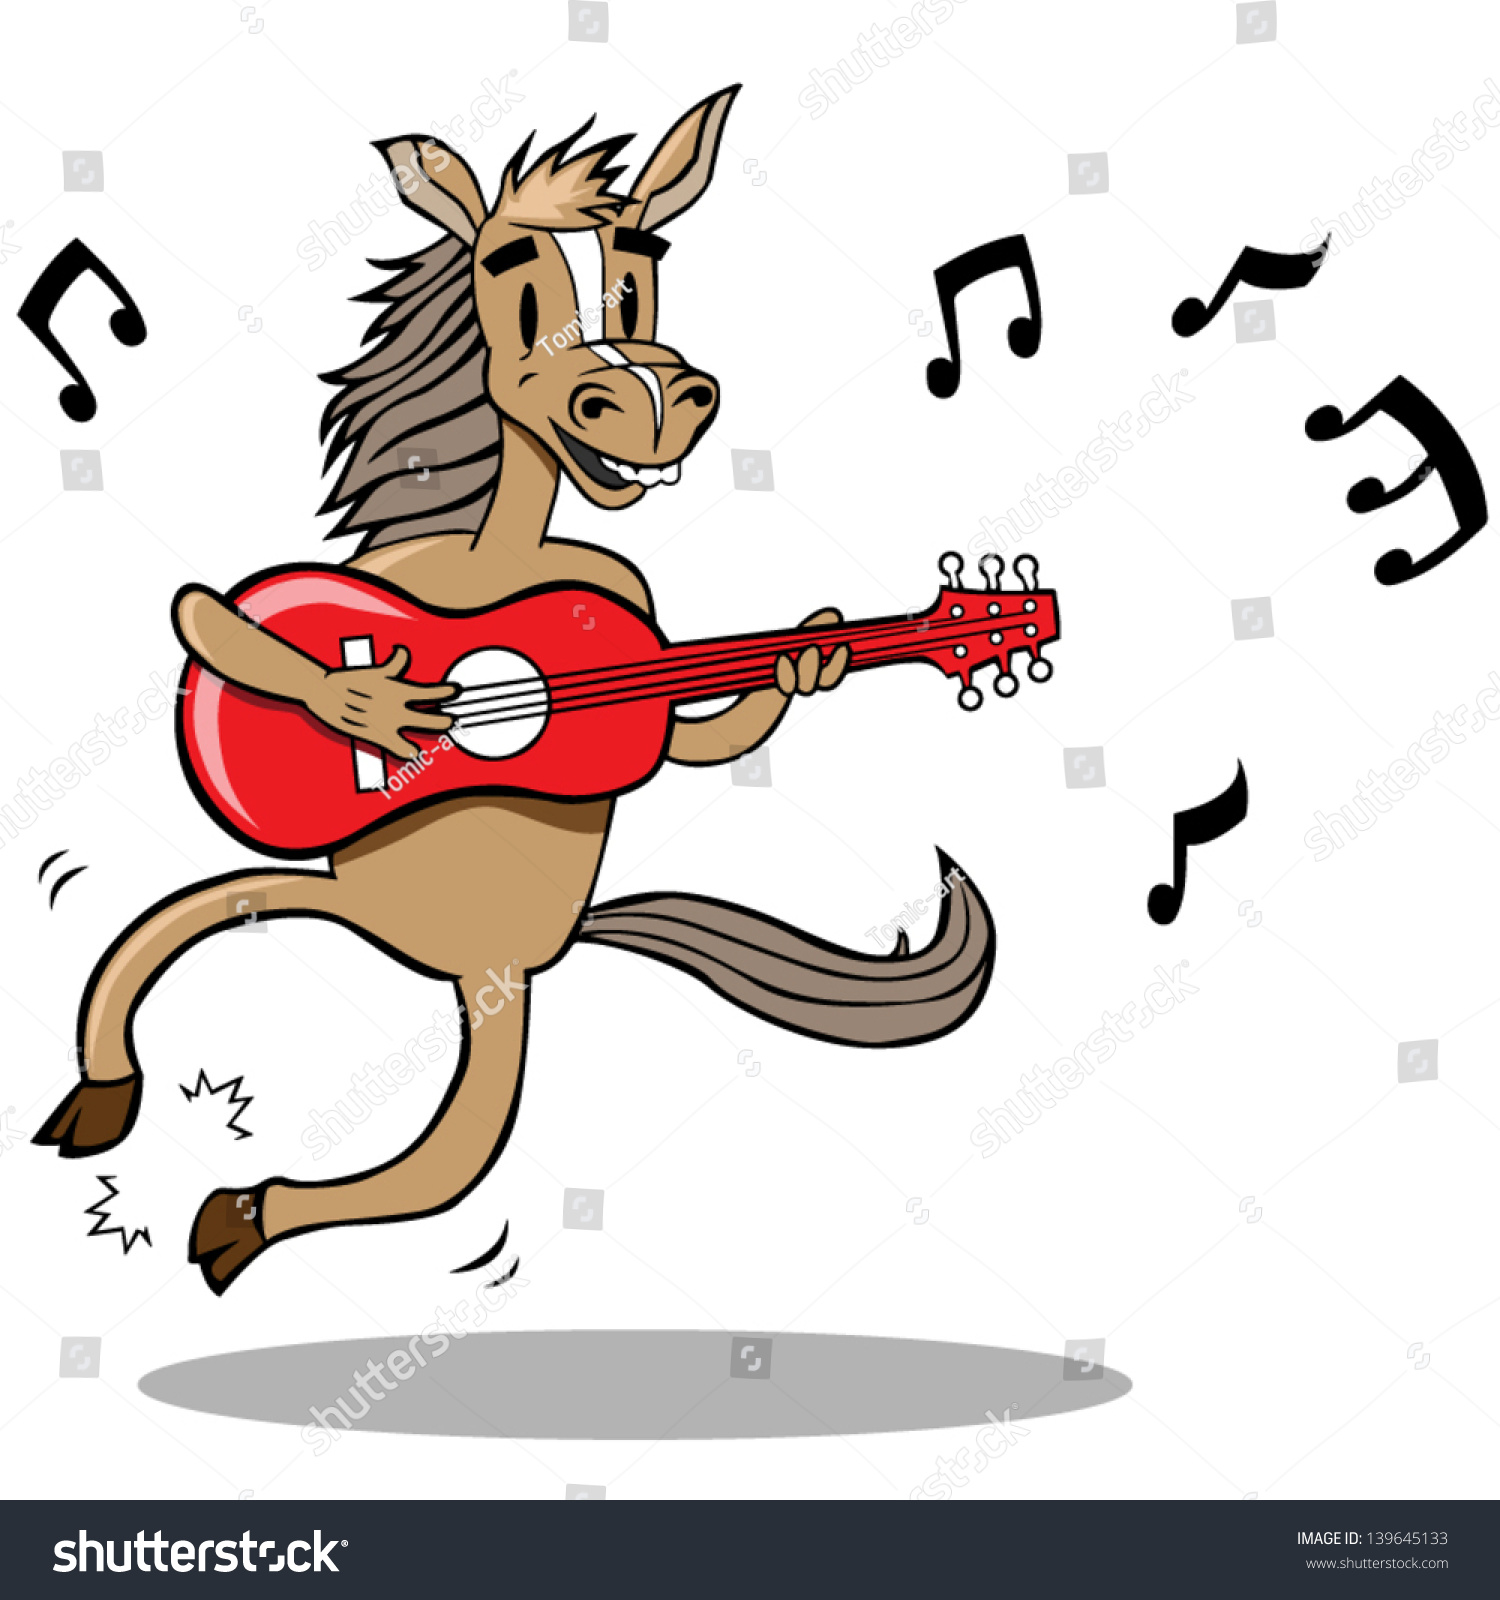 clipart horse laughing - photo #11